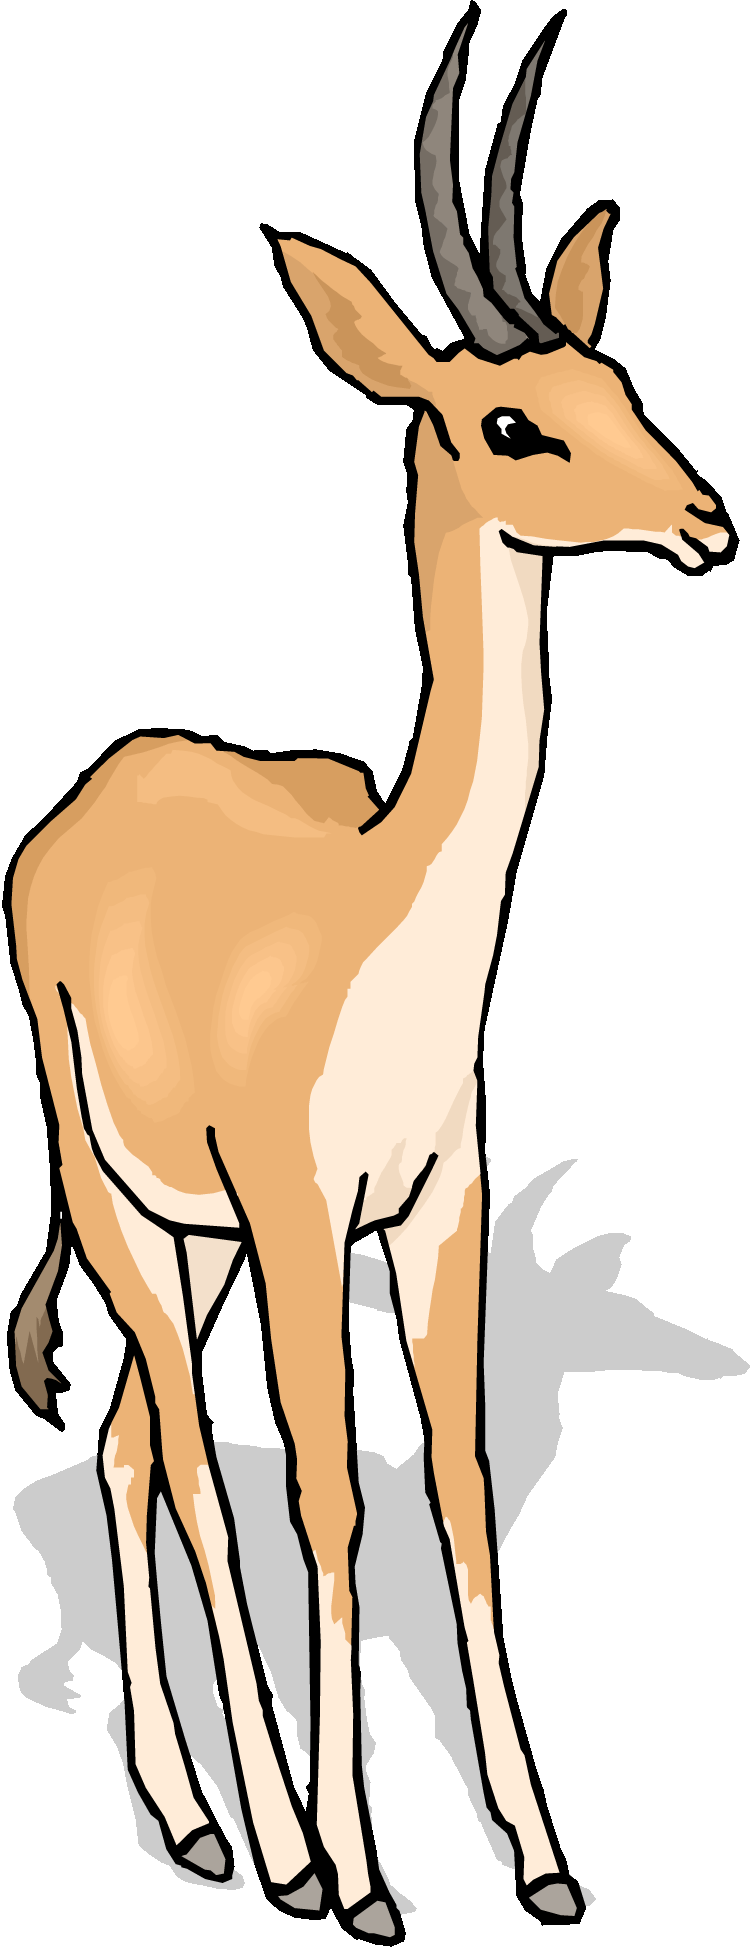 Gazelle clipart #16, Download drawings